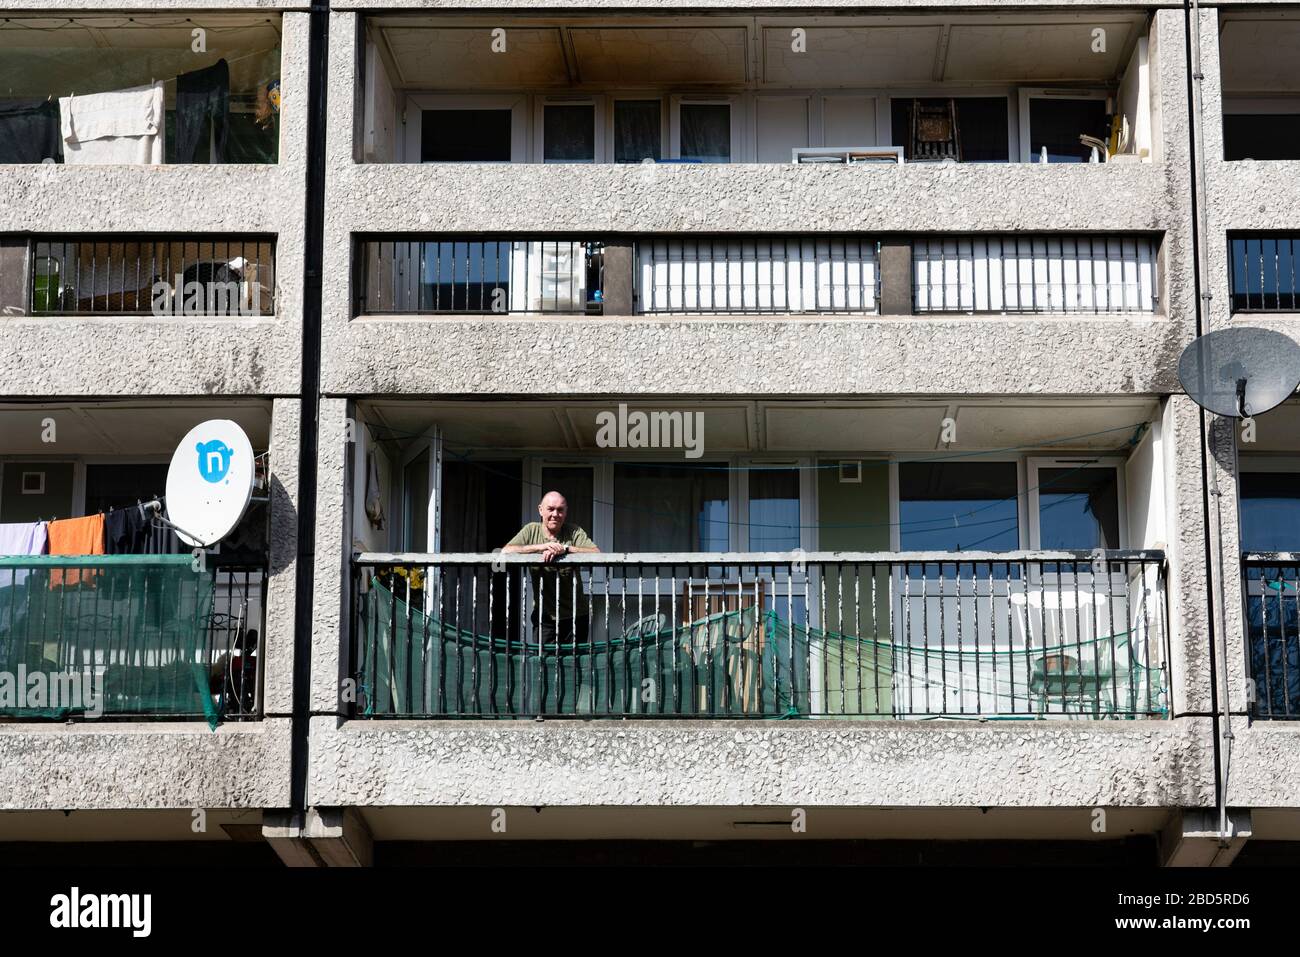 Leith, Edinburgh, Scotland, UK. 7 April 2020. In the third week of the nationwide coronavirus lockdown life in Leith continues although the streets are mostly deserted and shops closed. Pictured; Elderly man on balcony in his flat in Cables Wynd House apartment block. Stock Photo